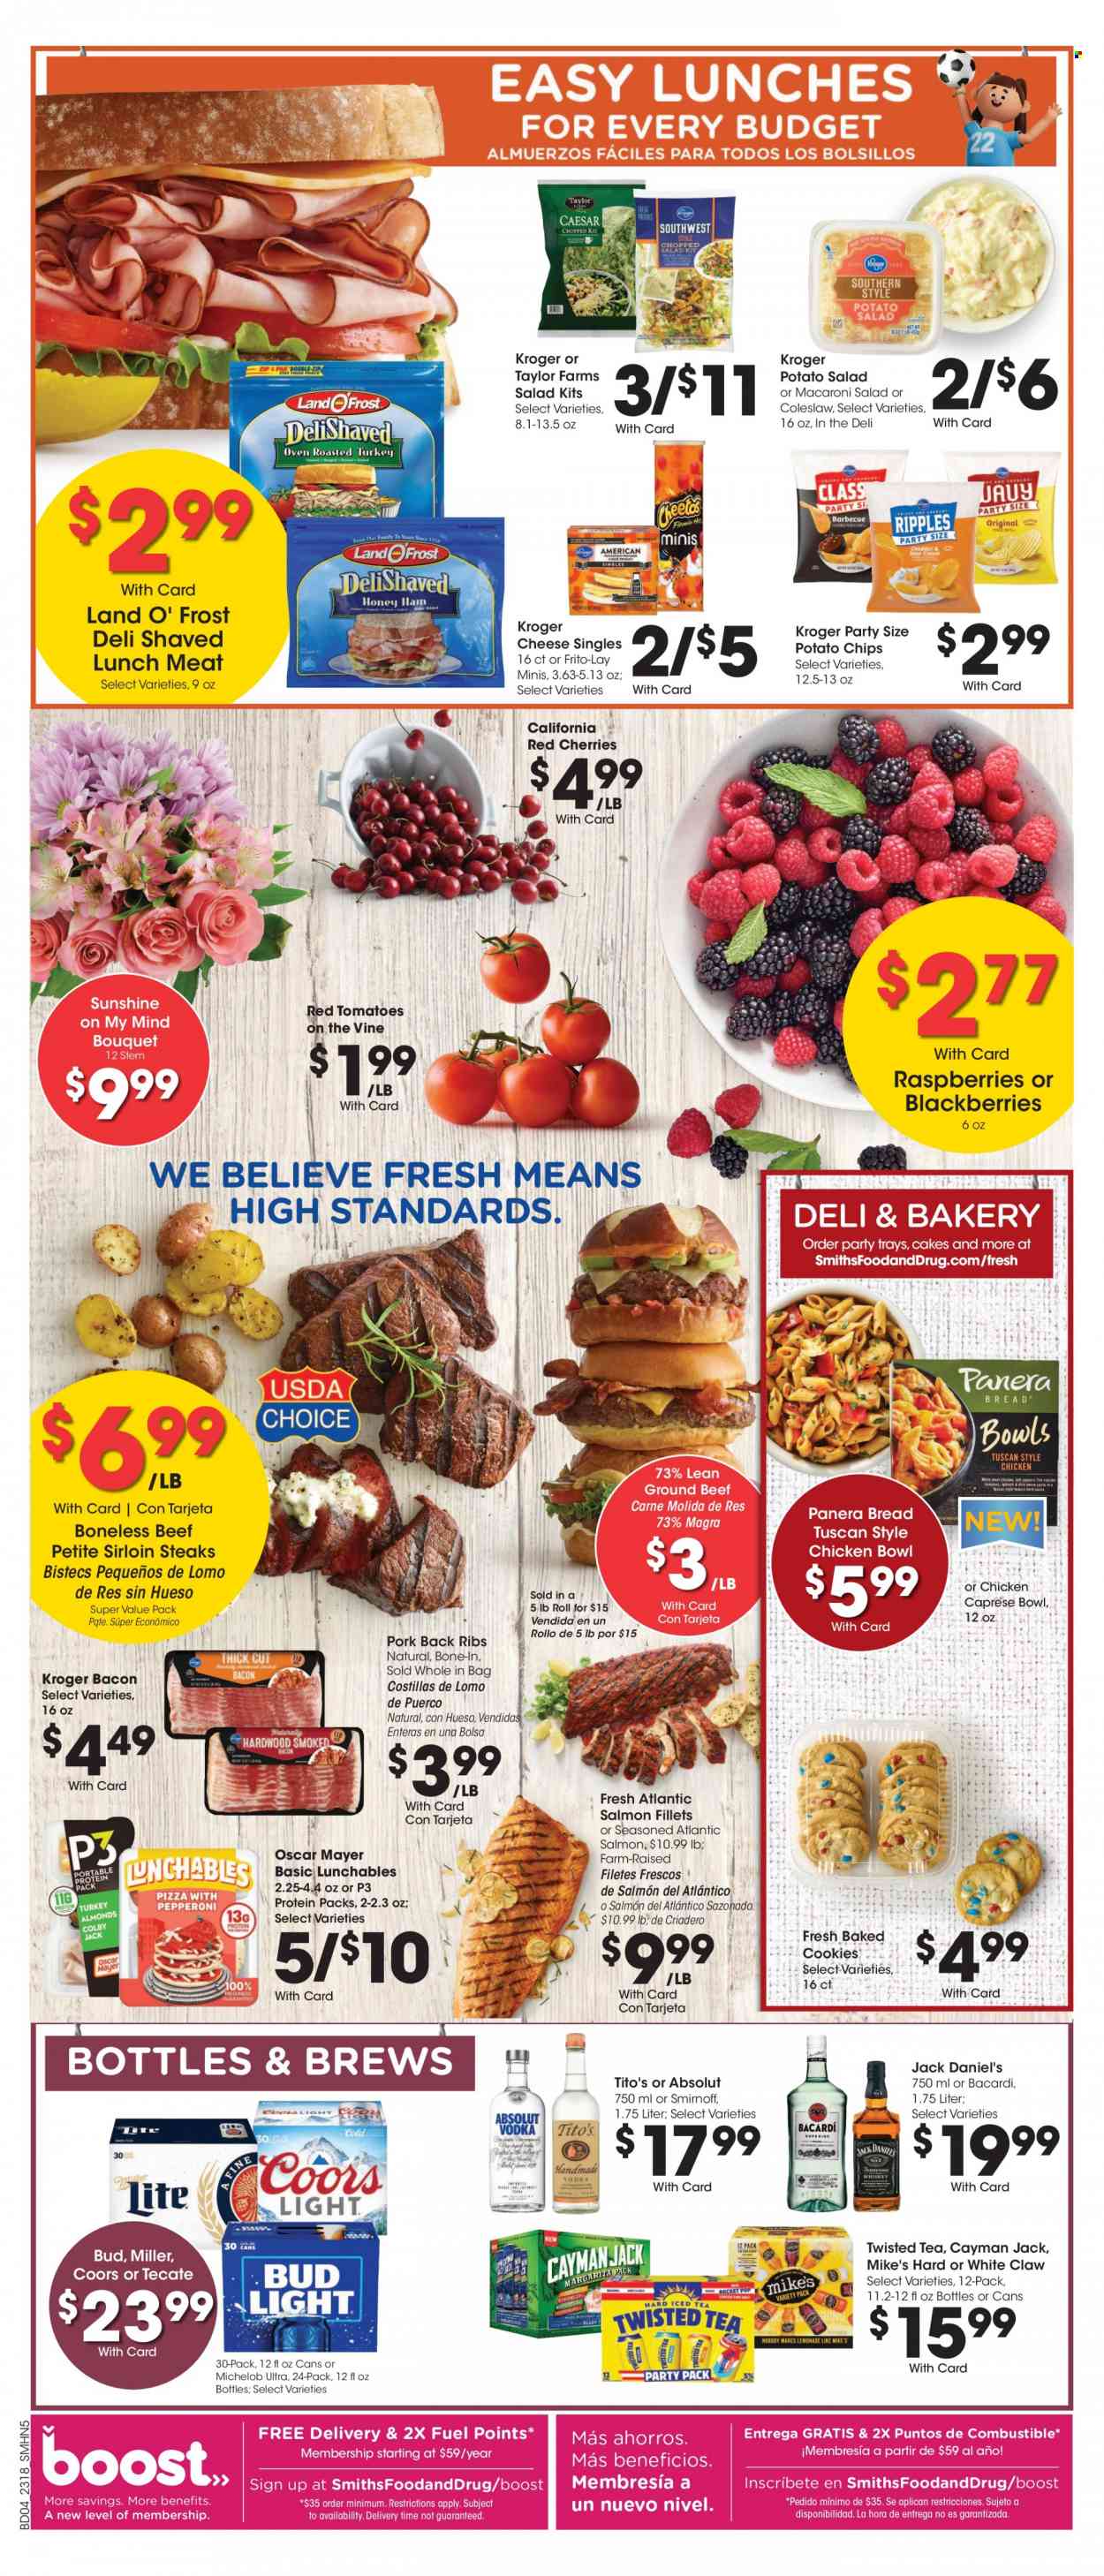 thumbnail - Smith's Flyer - 05/31/2023 - 06/06/2023 - Sales products - bread, cake, tomatoes, blackberries, raspberries, cherries, salmon, salmon fillet, coleslaw, Jack Daniel's, Lunchables, Oscar Mayer, potato salad, macaroni salad, lunch meat, cookies, potato chips, chips, Frito-Lay, ice tea, sparkling water, Boost, Bacardi, Smirnoff, vodka, Absolut, White Claw, beer, beef meat, ground beef, steak, sirloin steak, ribs, pork meat, pork ribs, pork back ribs, Coors, Twisted Tea, Michelob. Page 4.